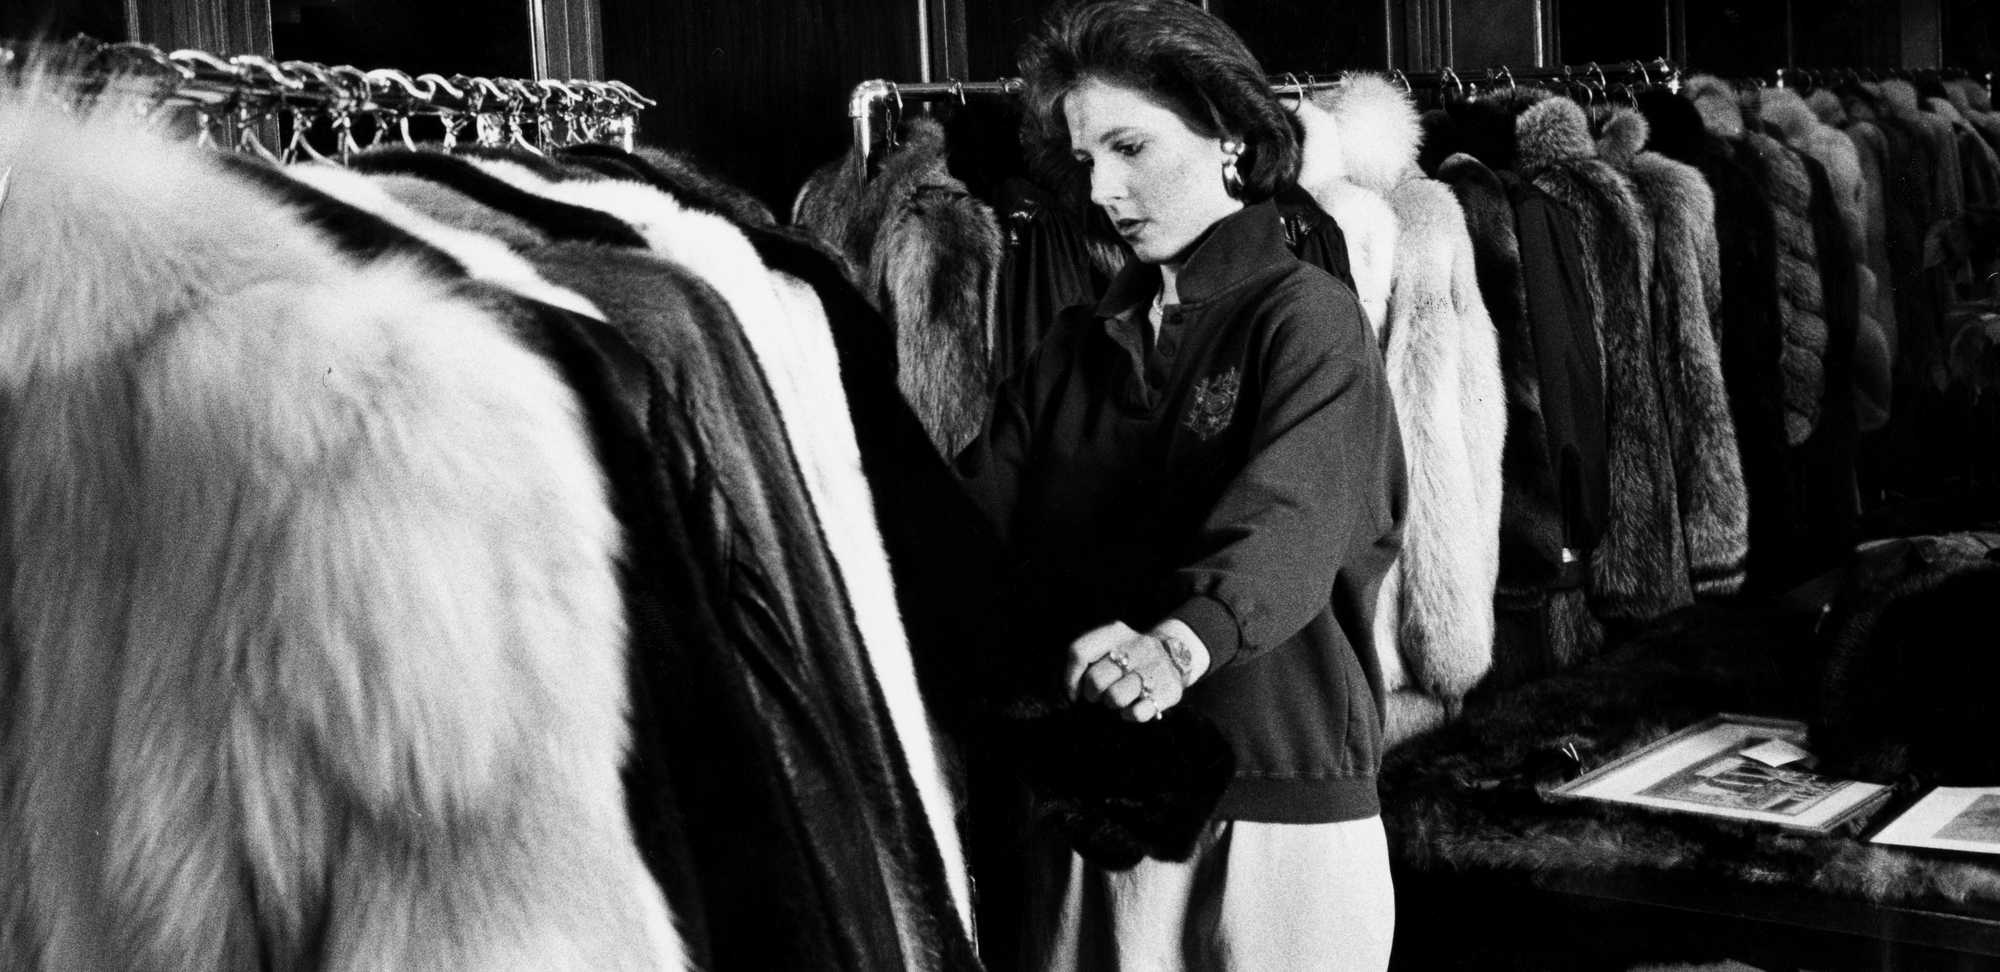 An employee at Kakas Furs adjusted the coats on the racks on Jan. 3, 1990. Chuck Stuart was general manager at the posh Newbury Street store, which sold lavish fur coats to the jet set. 